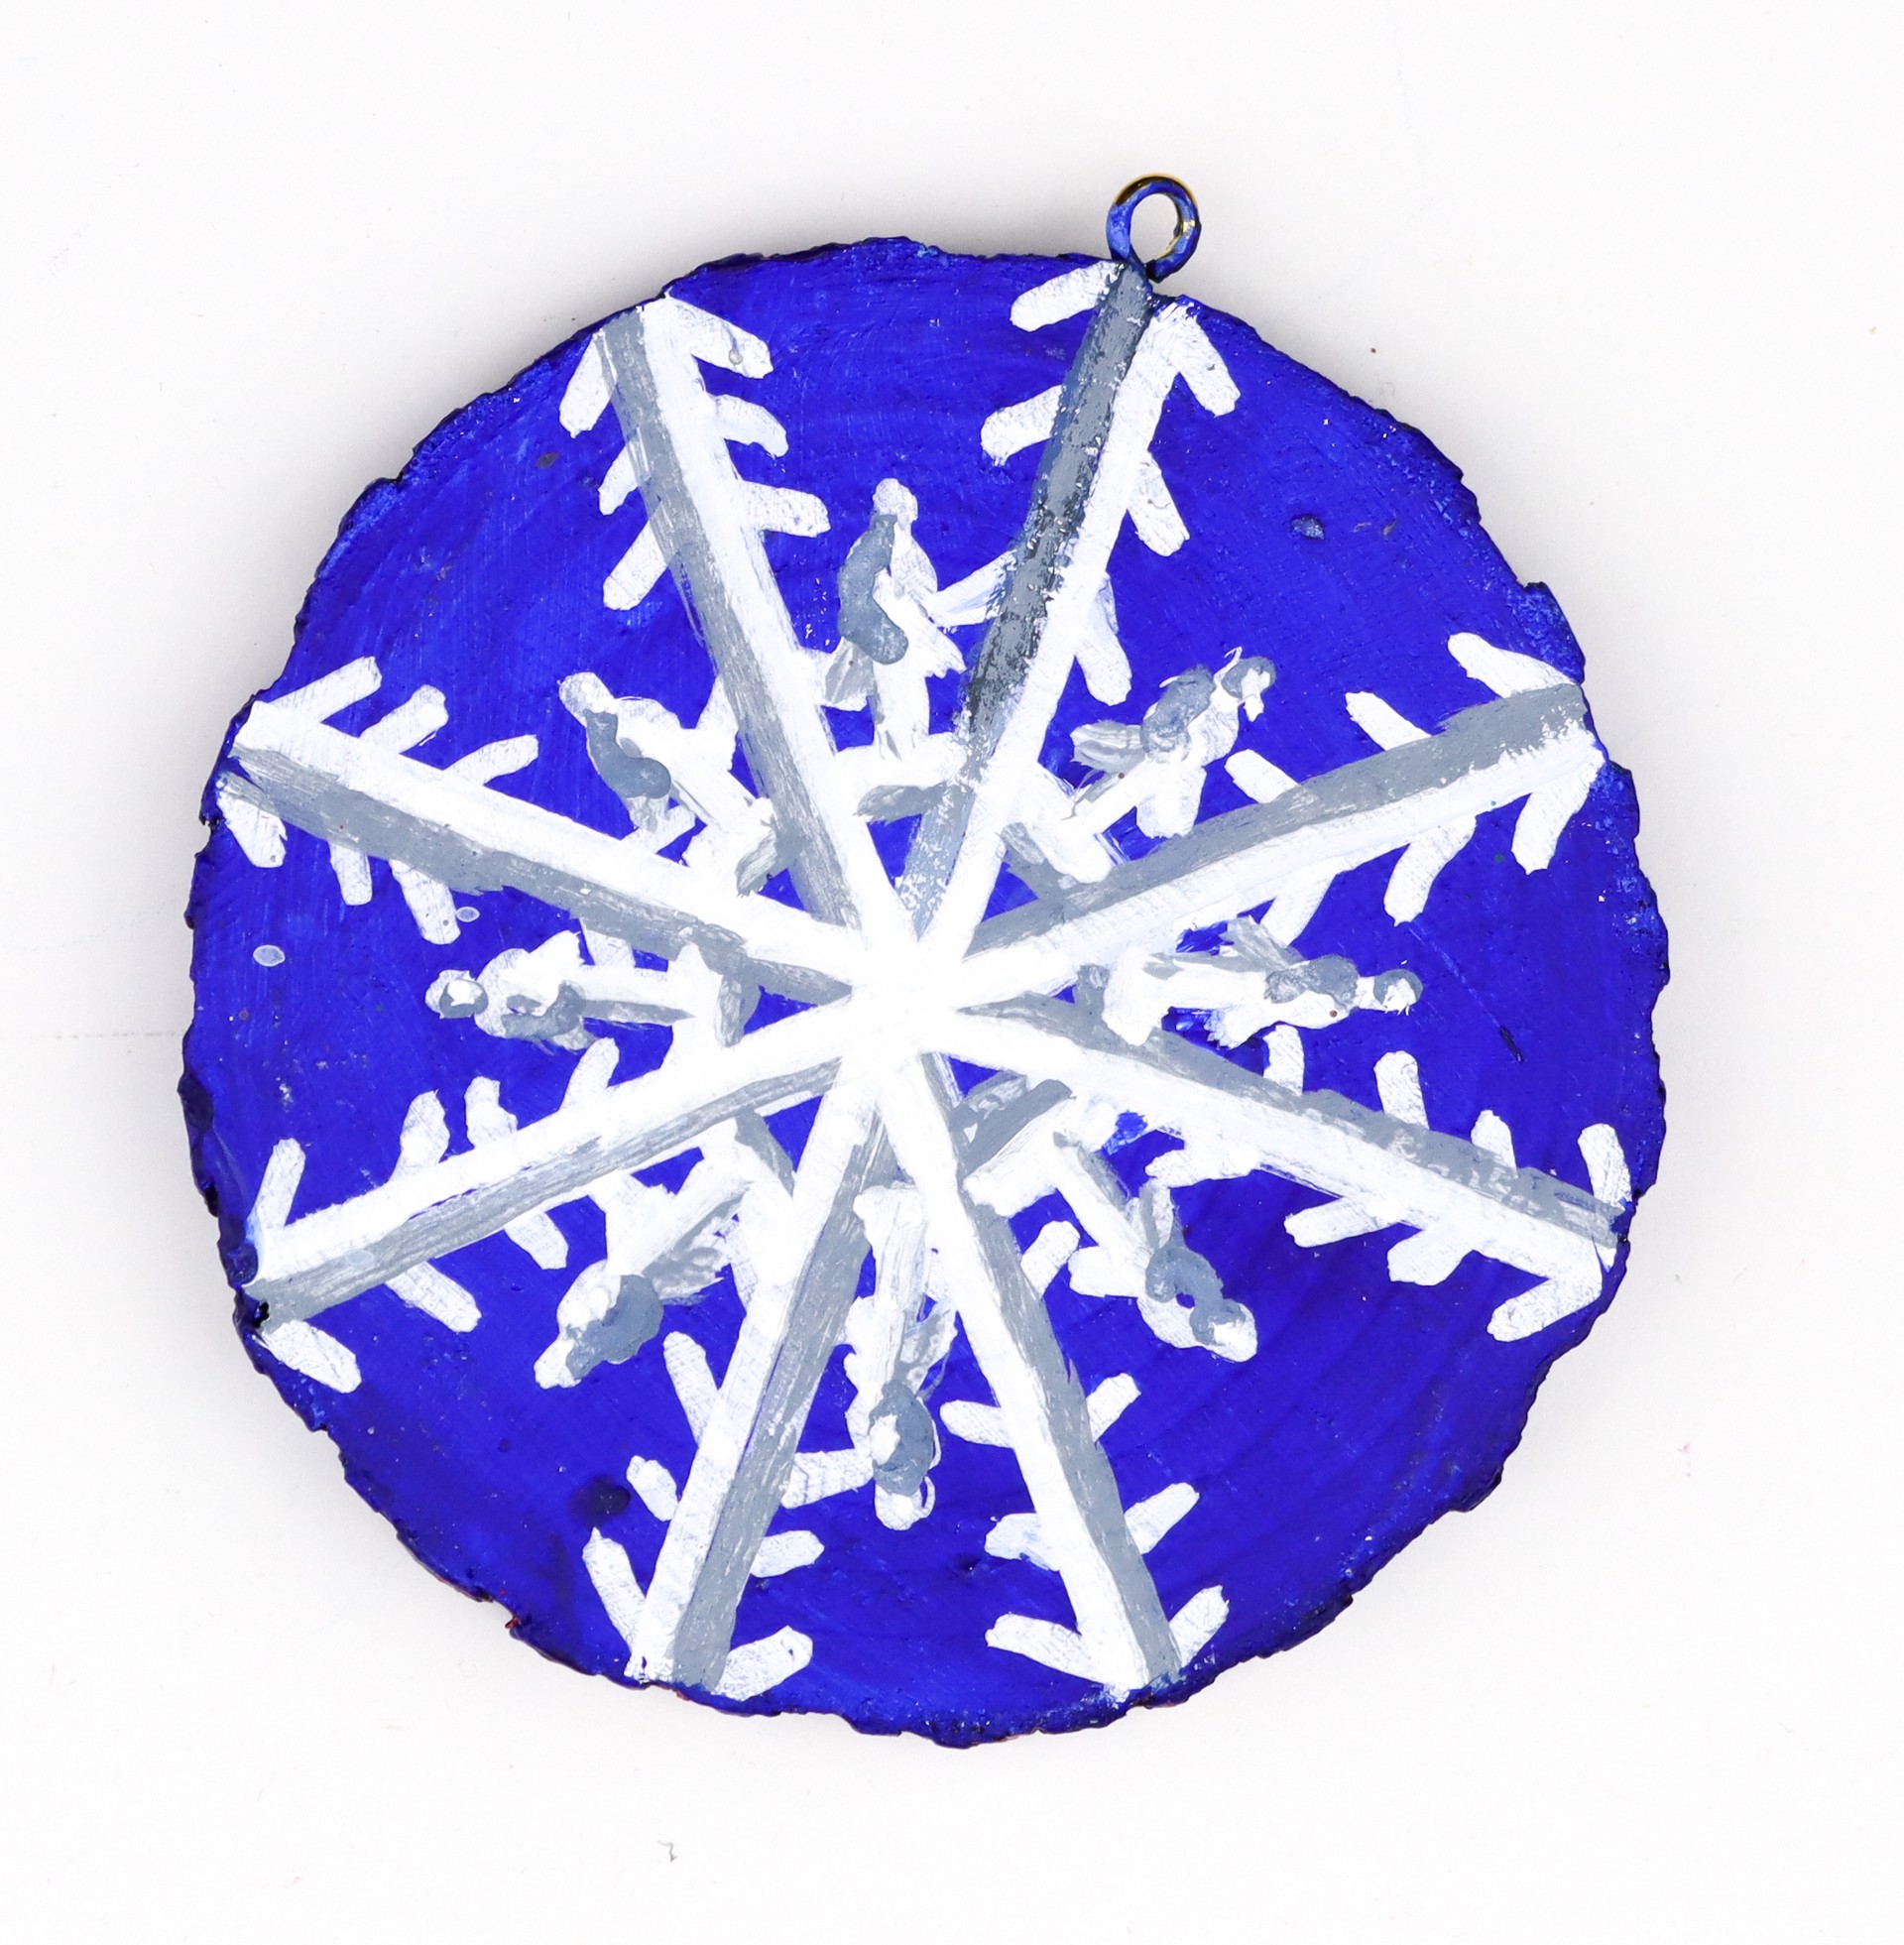 Snowflake (ornament) by Mike Knox